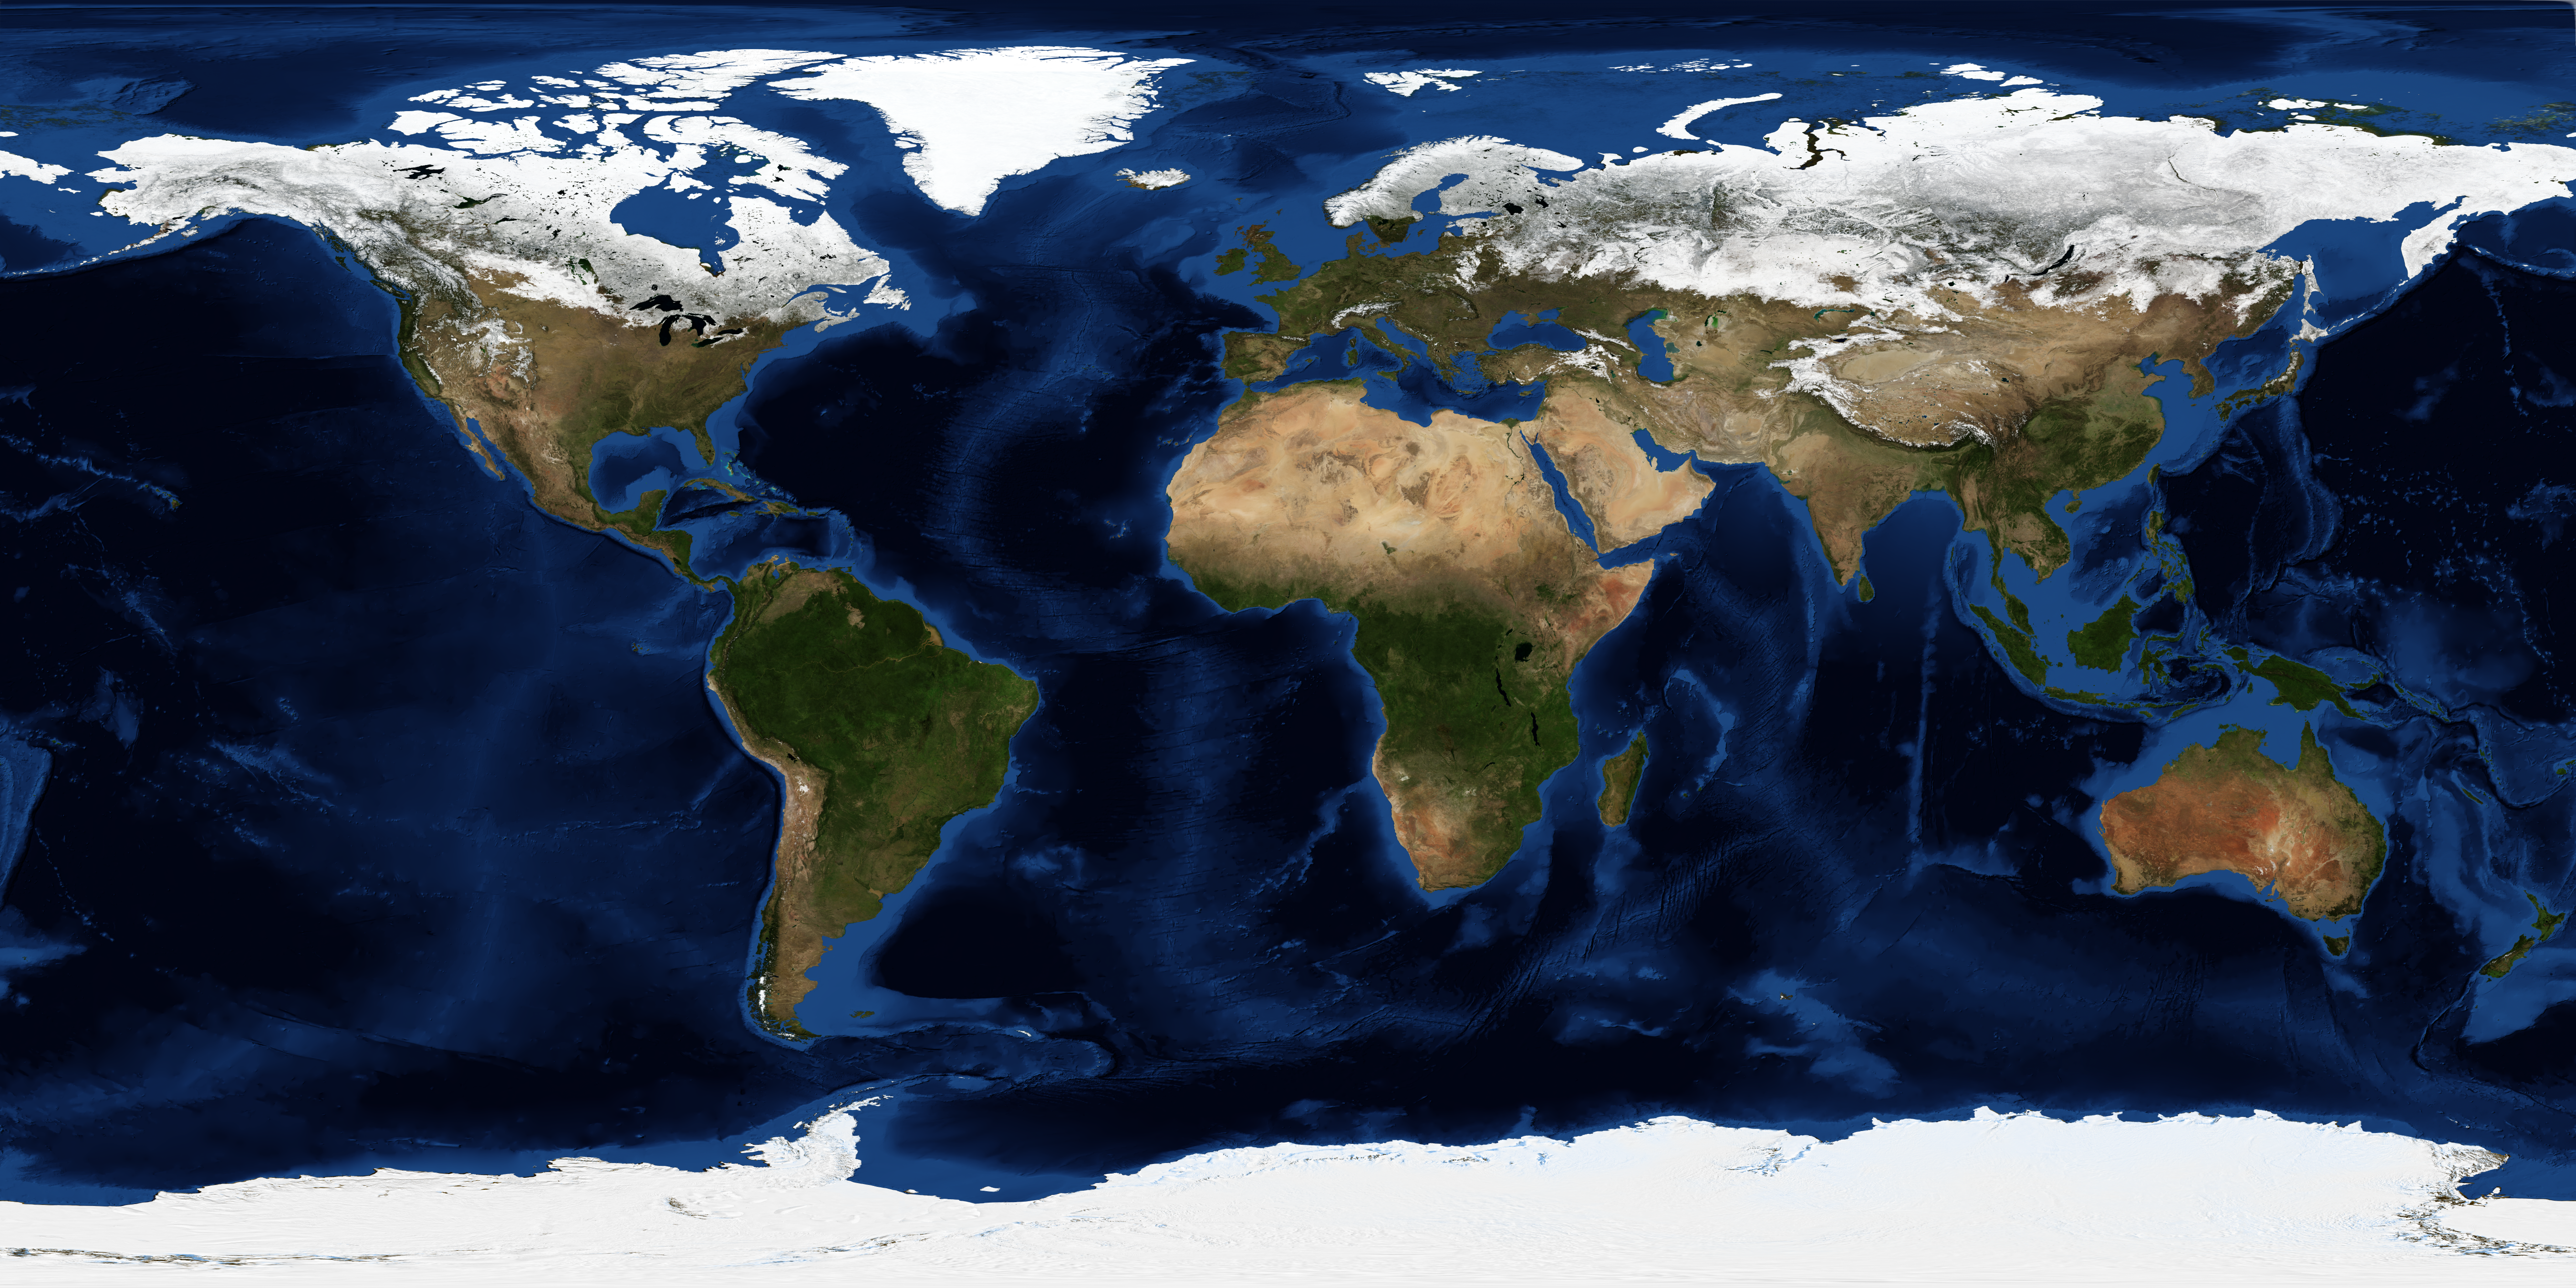 March, Blue Marble Next Generation w/ Topography and Bathymetry - related image preview